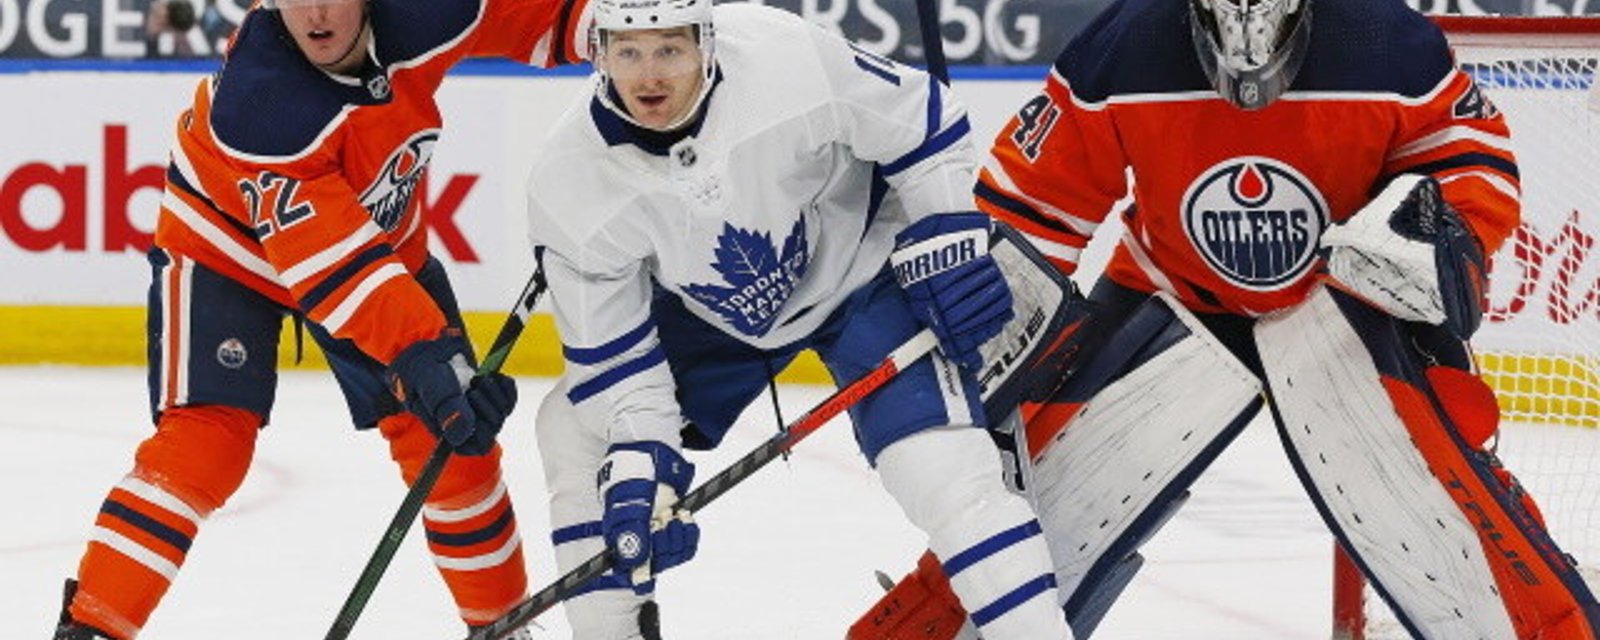 Leafs make unreasonable demand to Oilers for Hyman deal! 